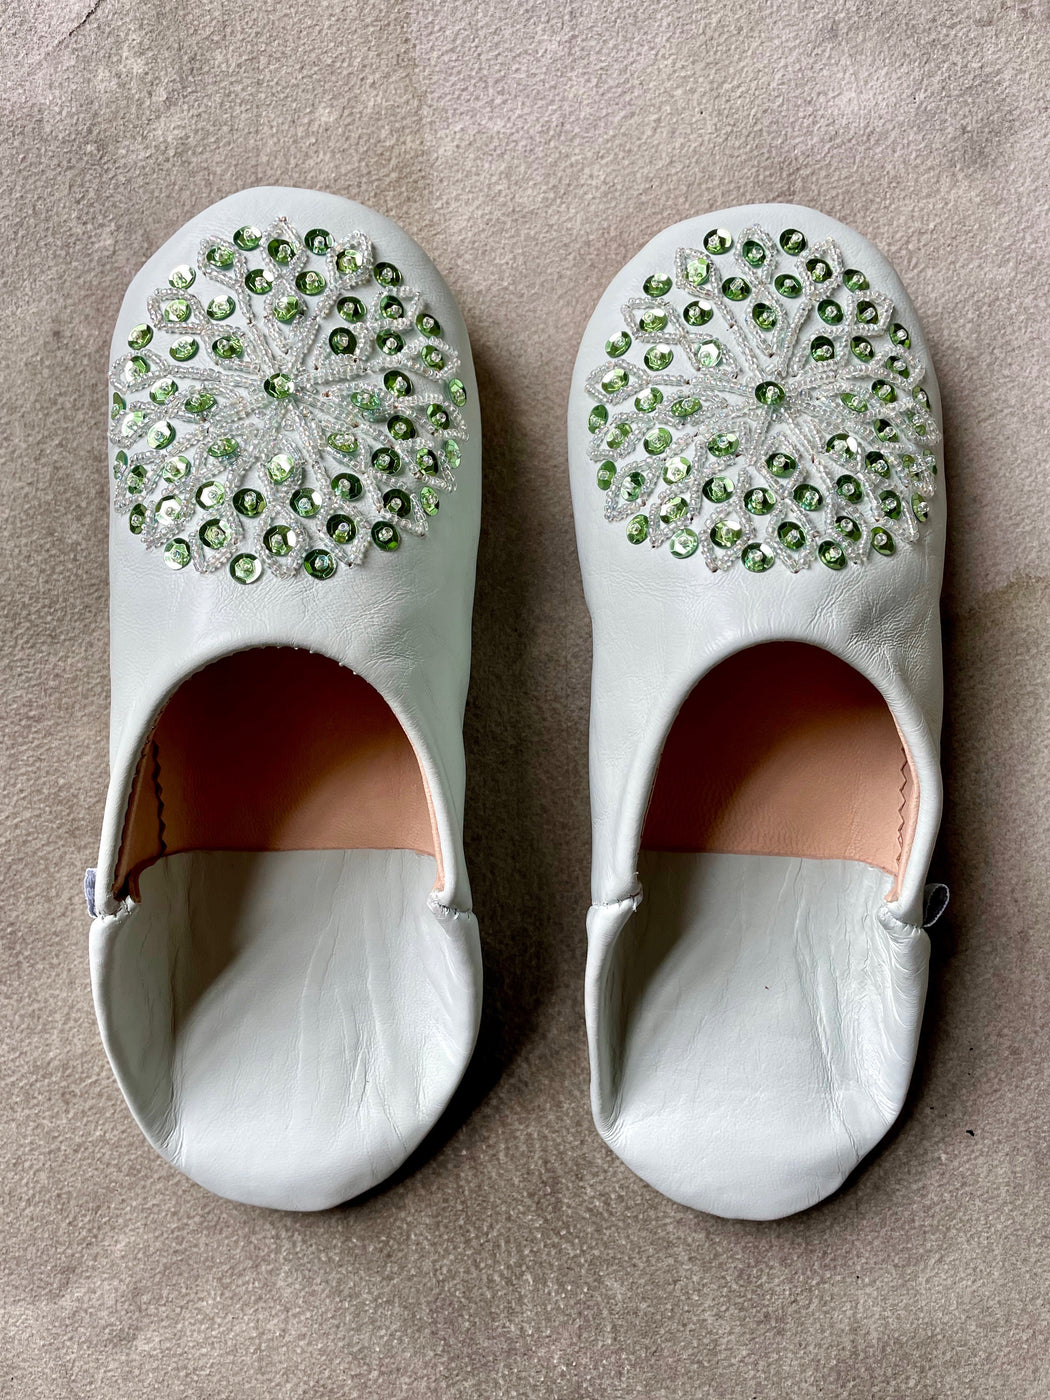 Beaded Moroccan Slippers - Pale Blue